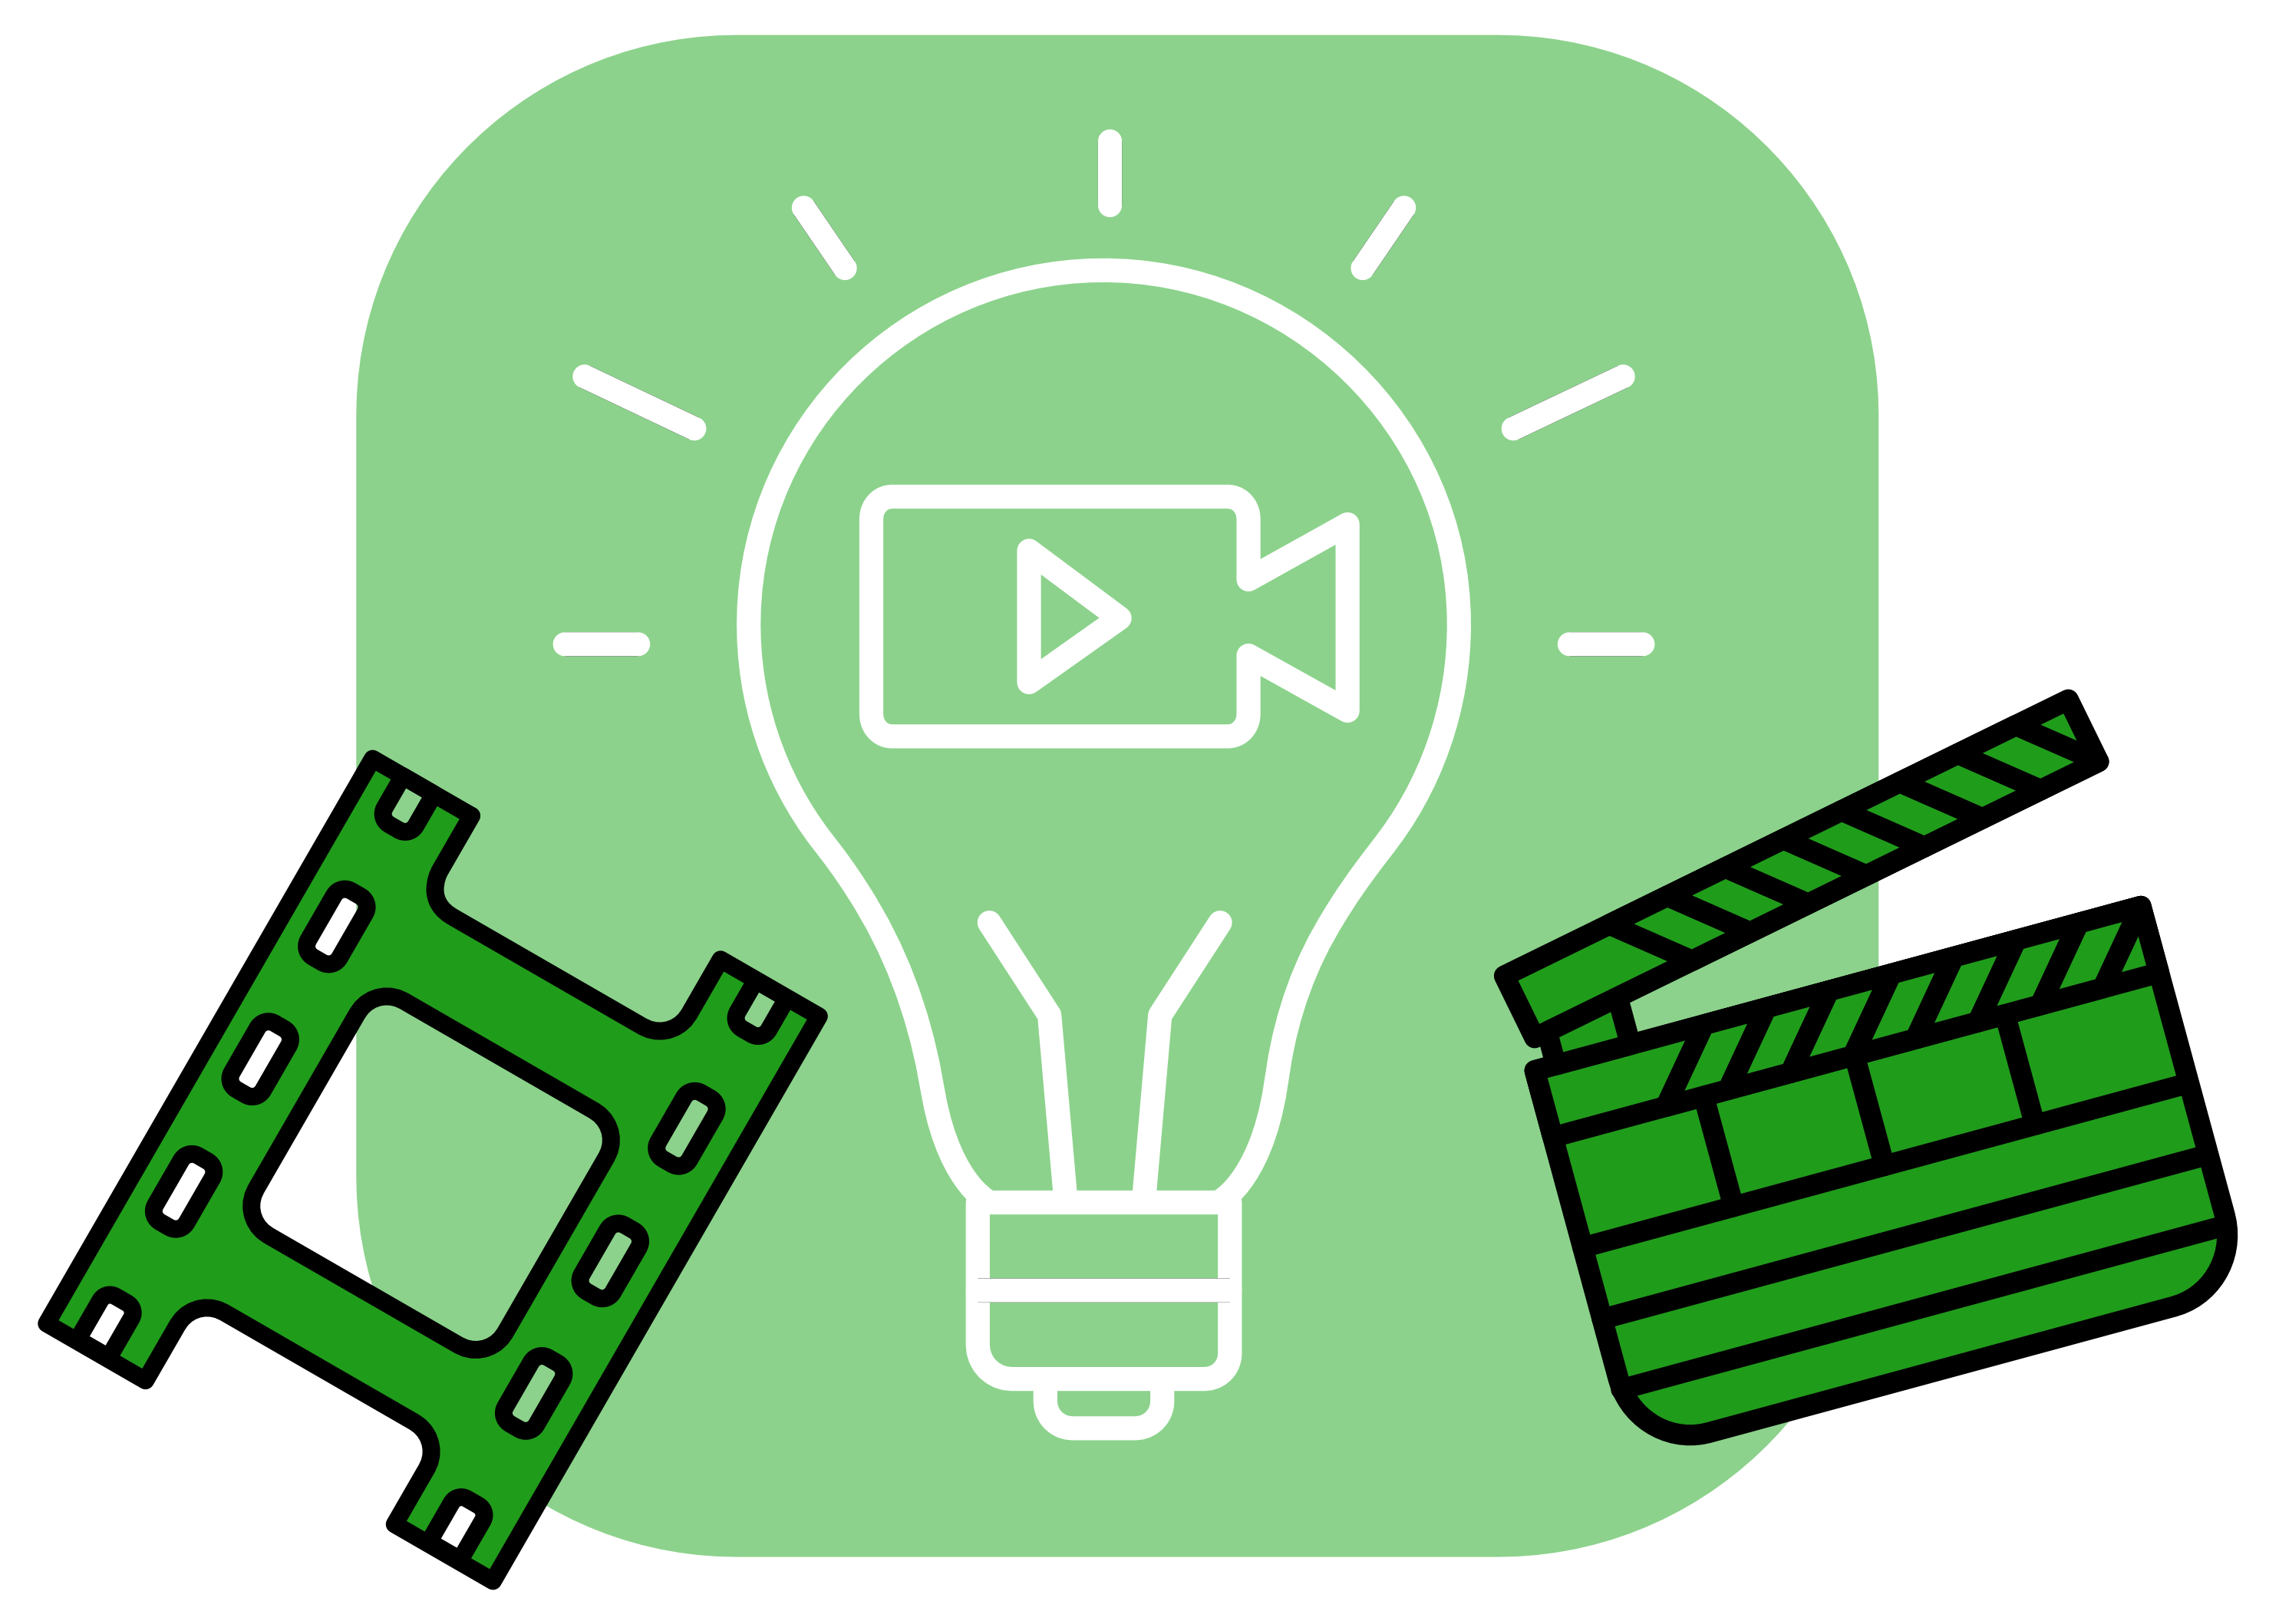 Video ideas concept. Stylized illustration of a video icon in a lightbulb. Video production Edmonton Calgary Alberta Canada, professional video production services.